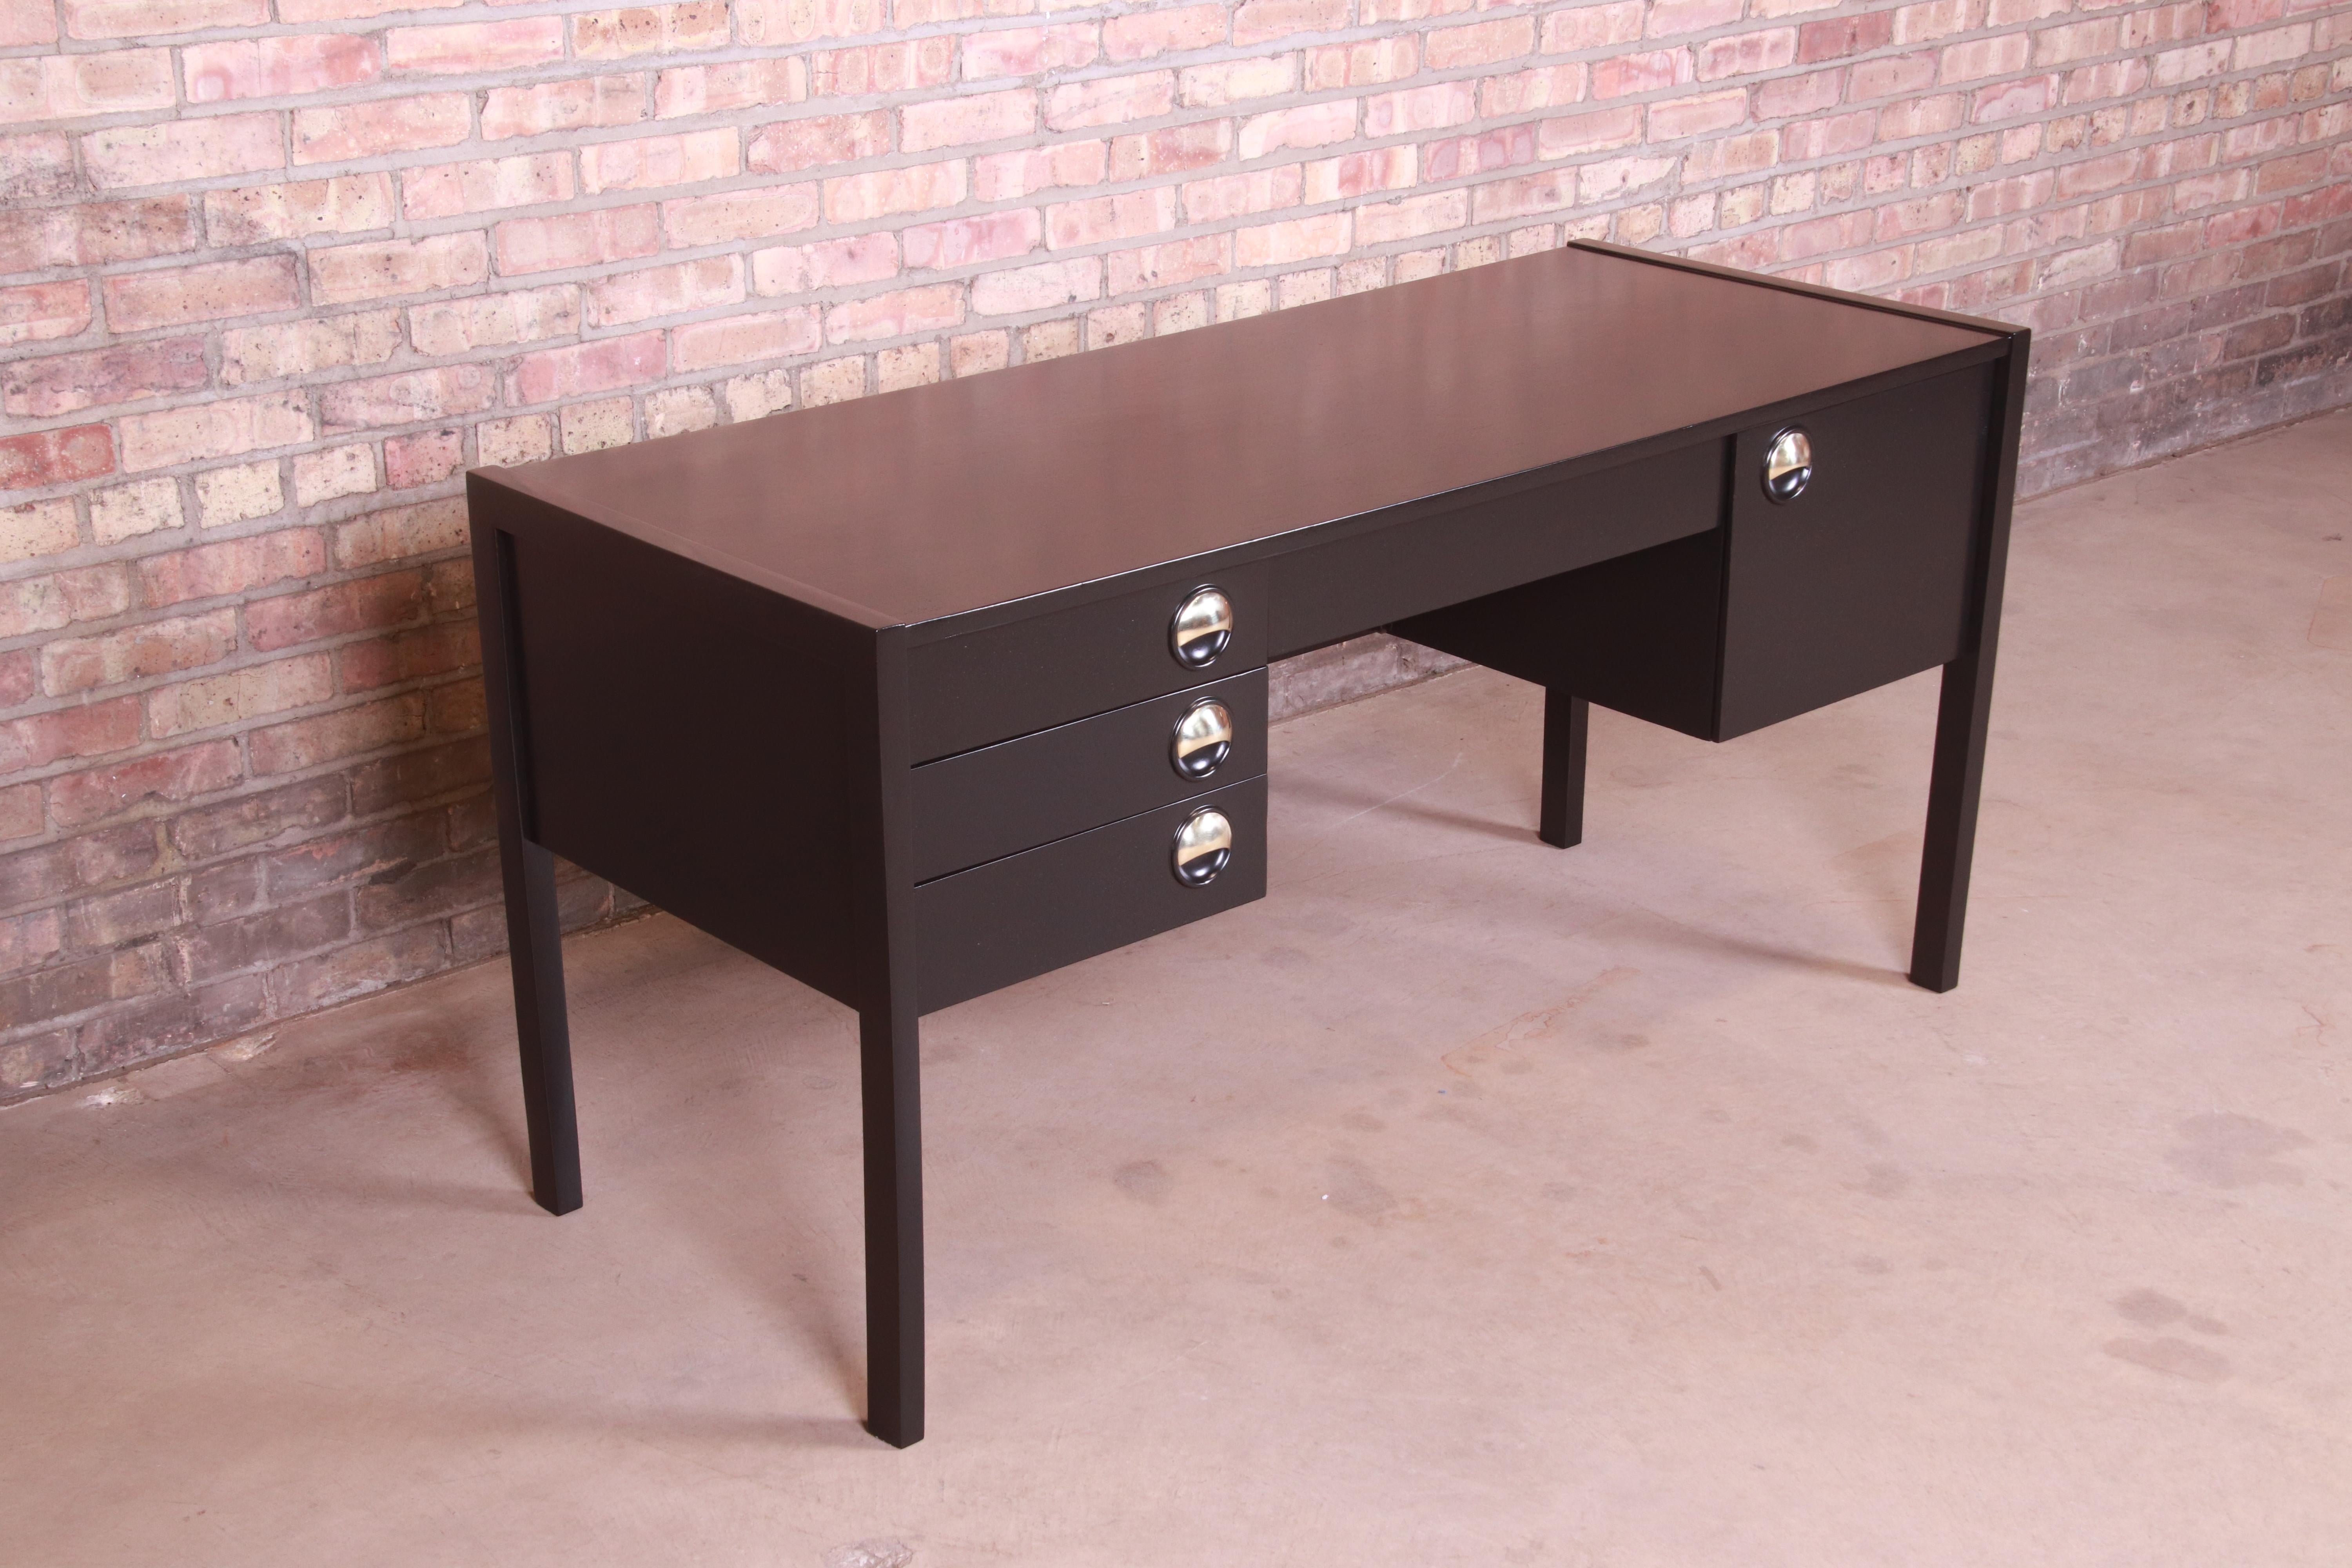 20th Century Swedish Modern Black Lacquered Desk, Newly Refinished